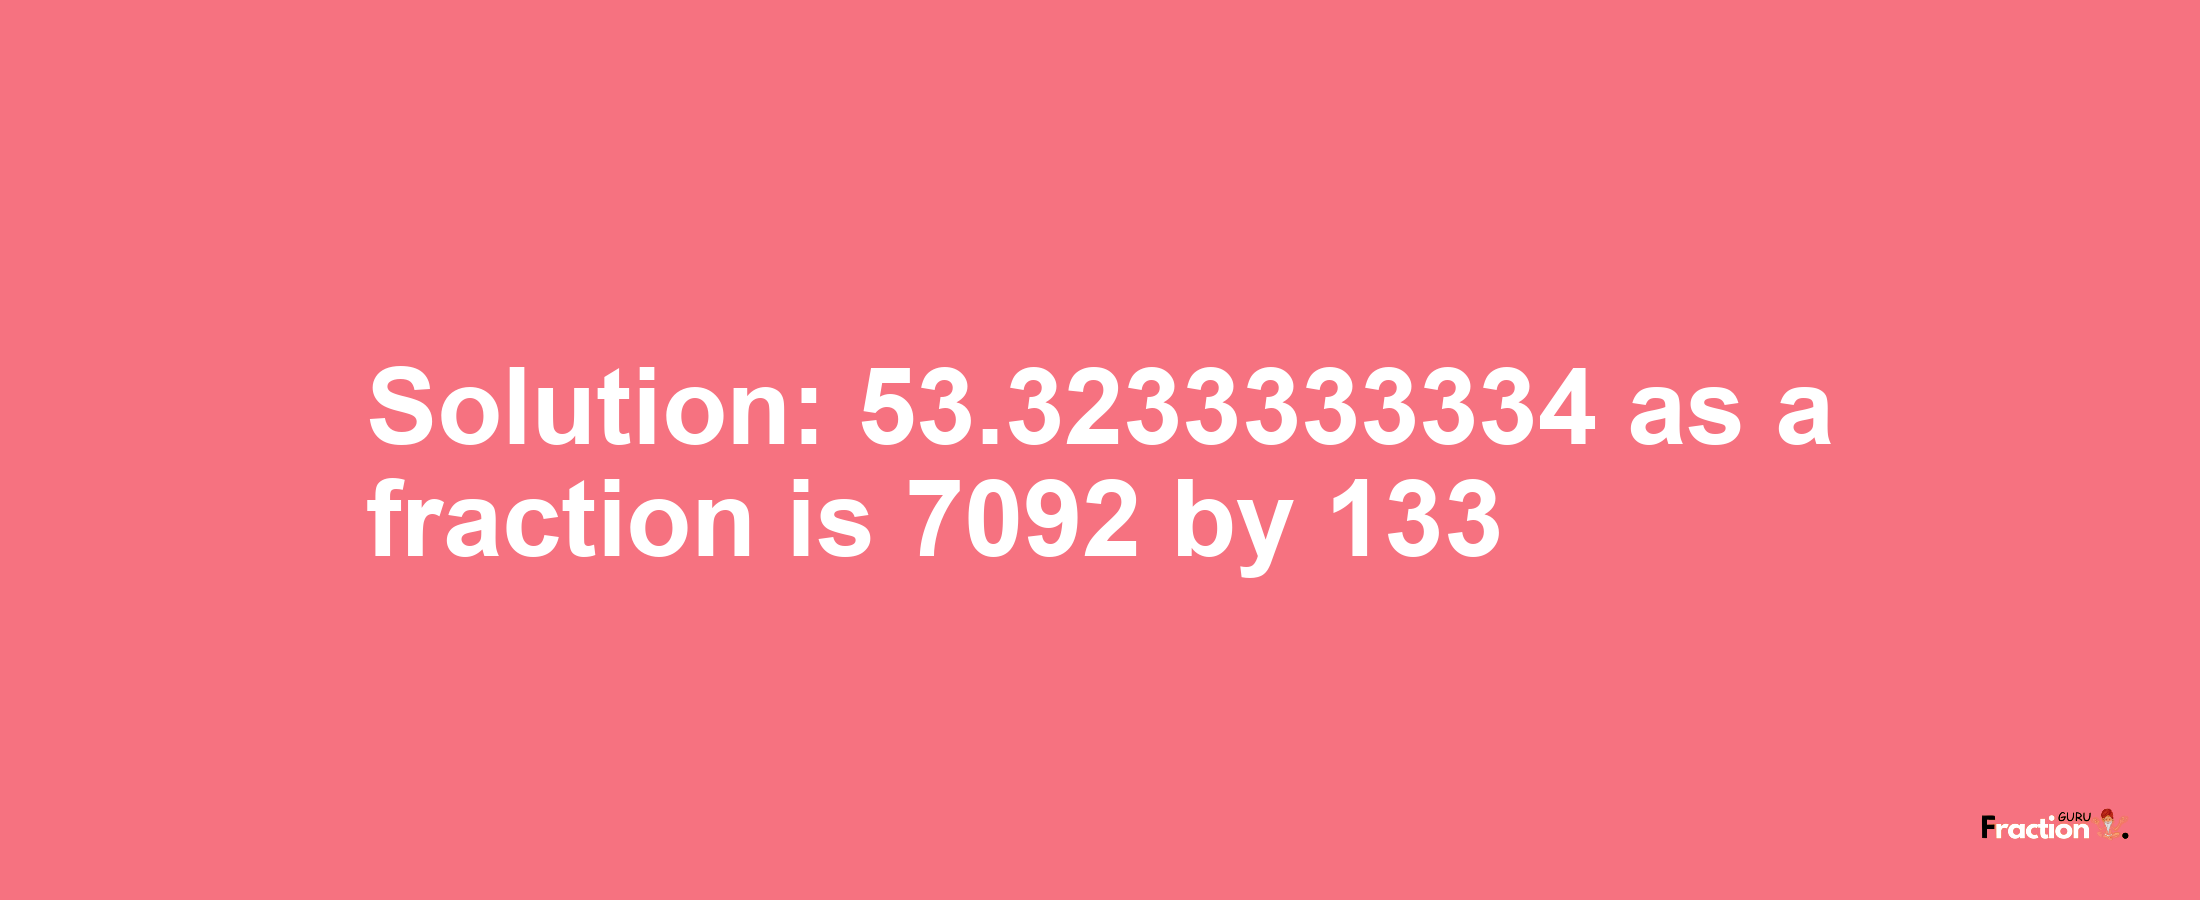 Solution:53.3233333334 as a fraction is 7092/133